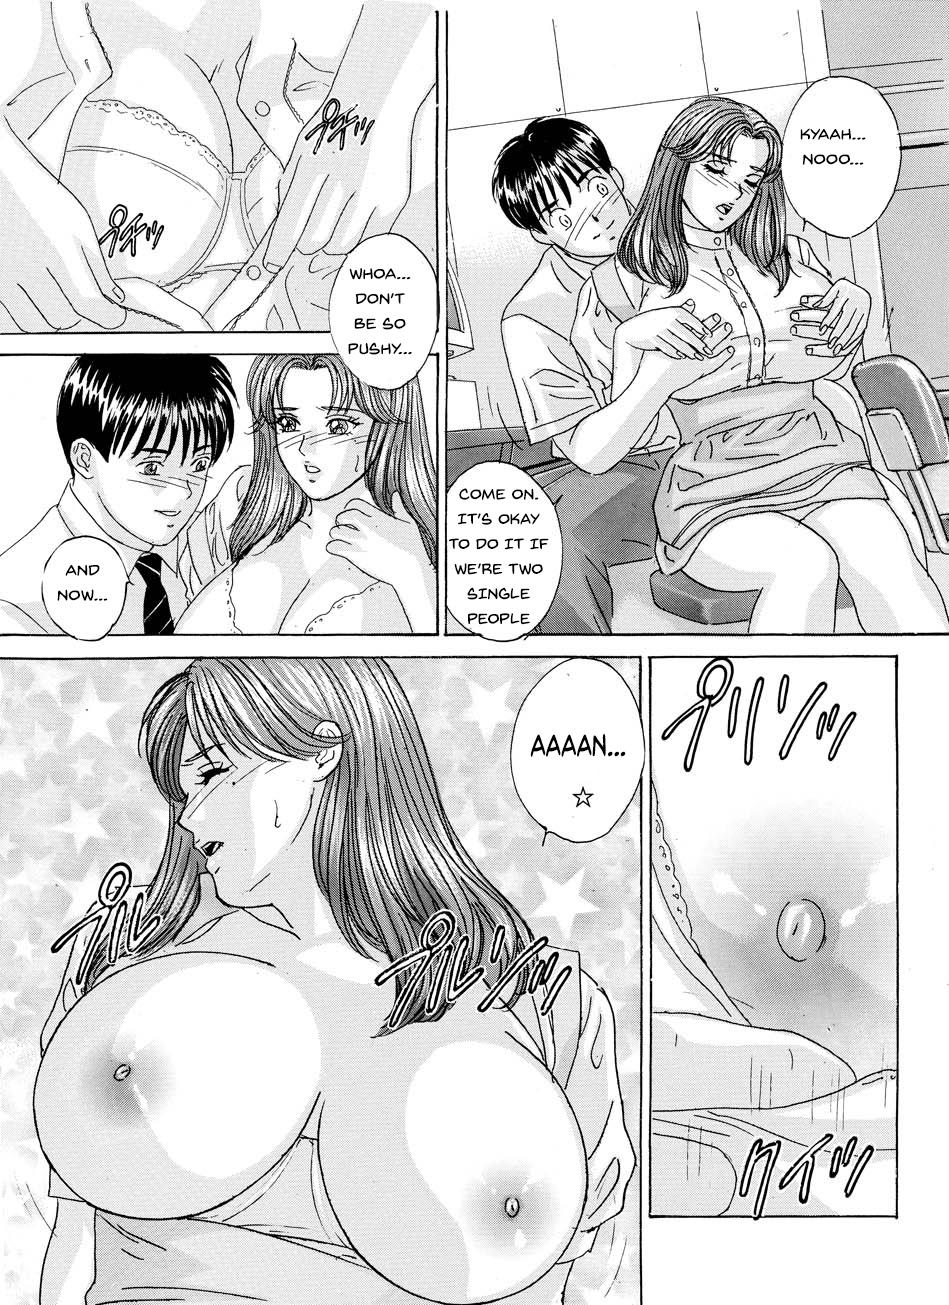 Tohru Nishimaki Delicate Fantasy Ch 1 3 English Download Adult Comics For Free From Uploaded